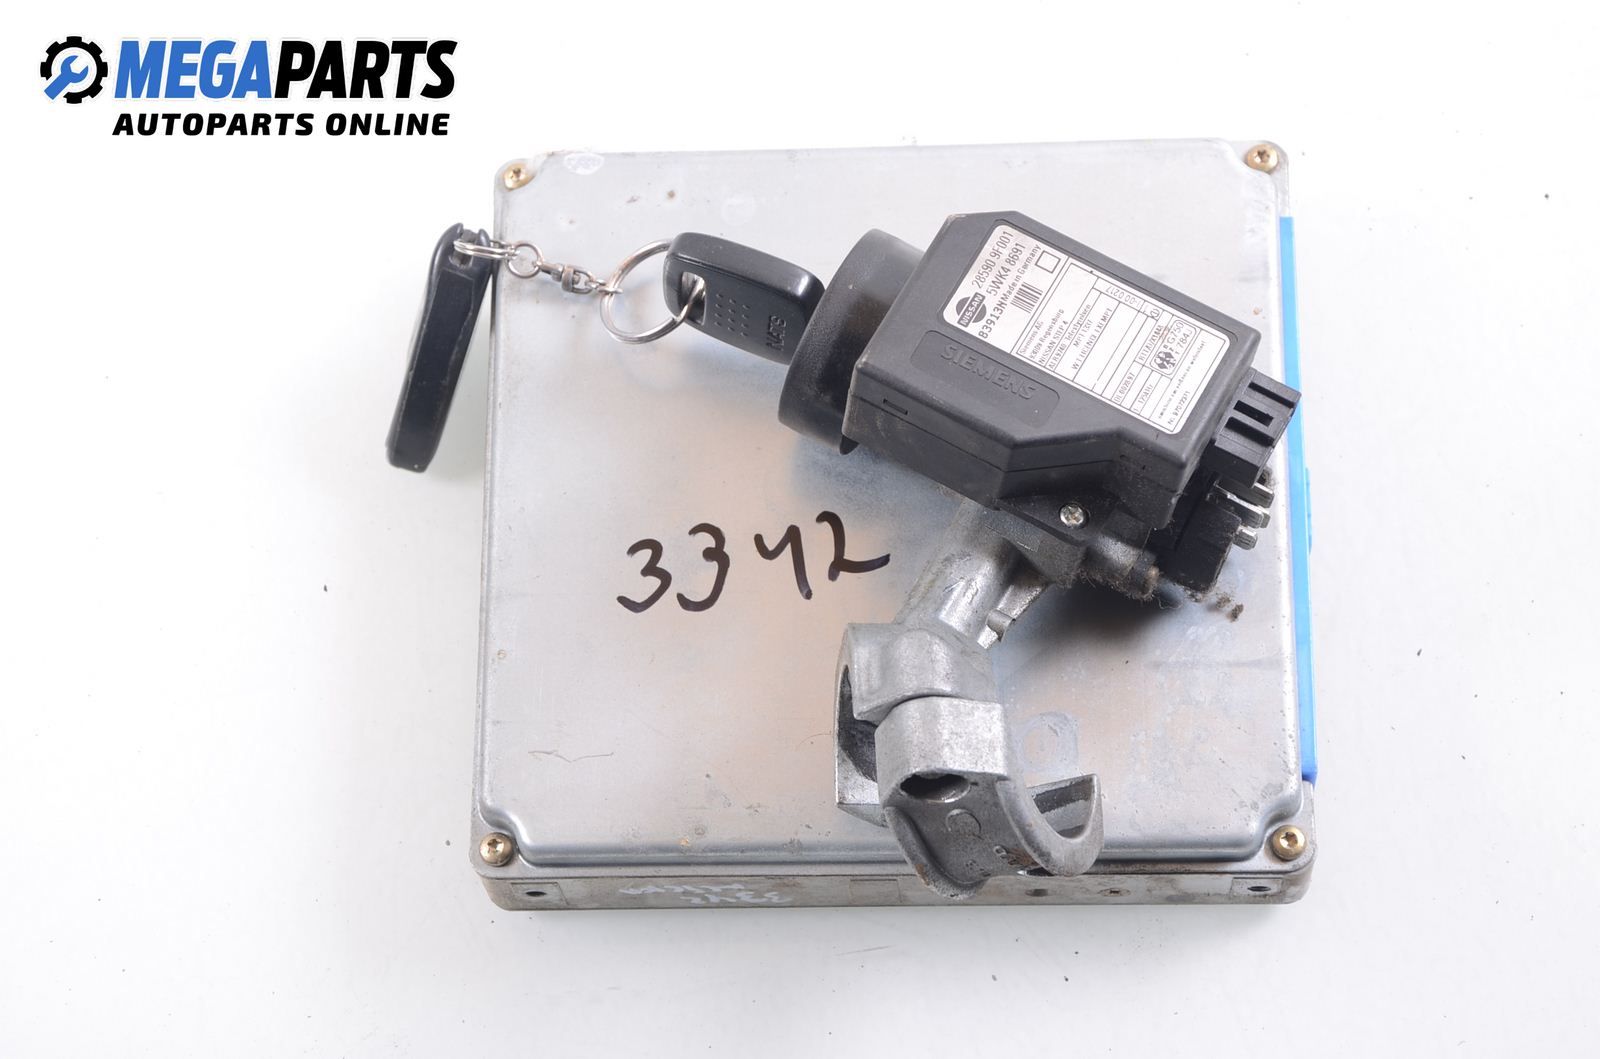 Ecu Incl. Ignition Key And Immobilizer For Nissan Micra (K11C) 1.3 16V, 75 Hp, 3 Doors, 1998 № Bosch 0 261 204 247 Price: € 87.08